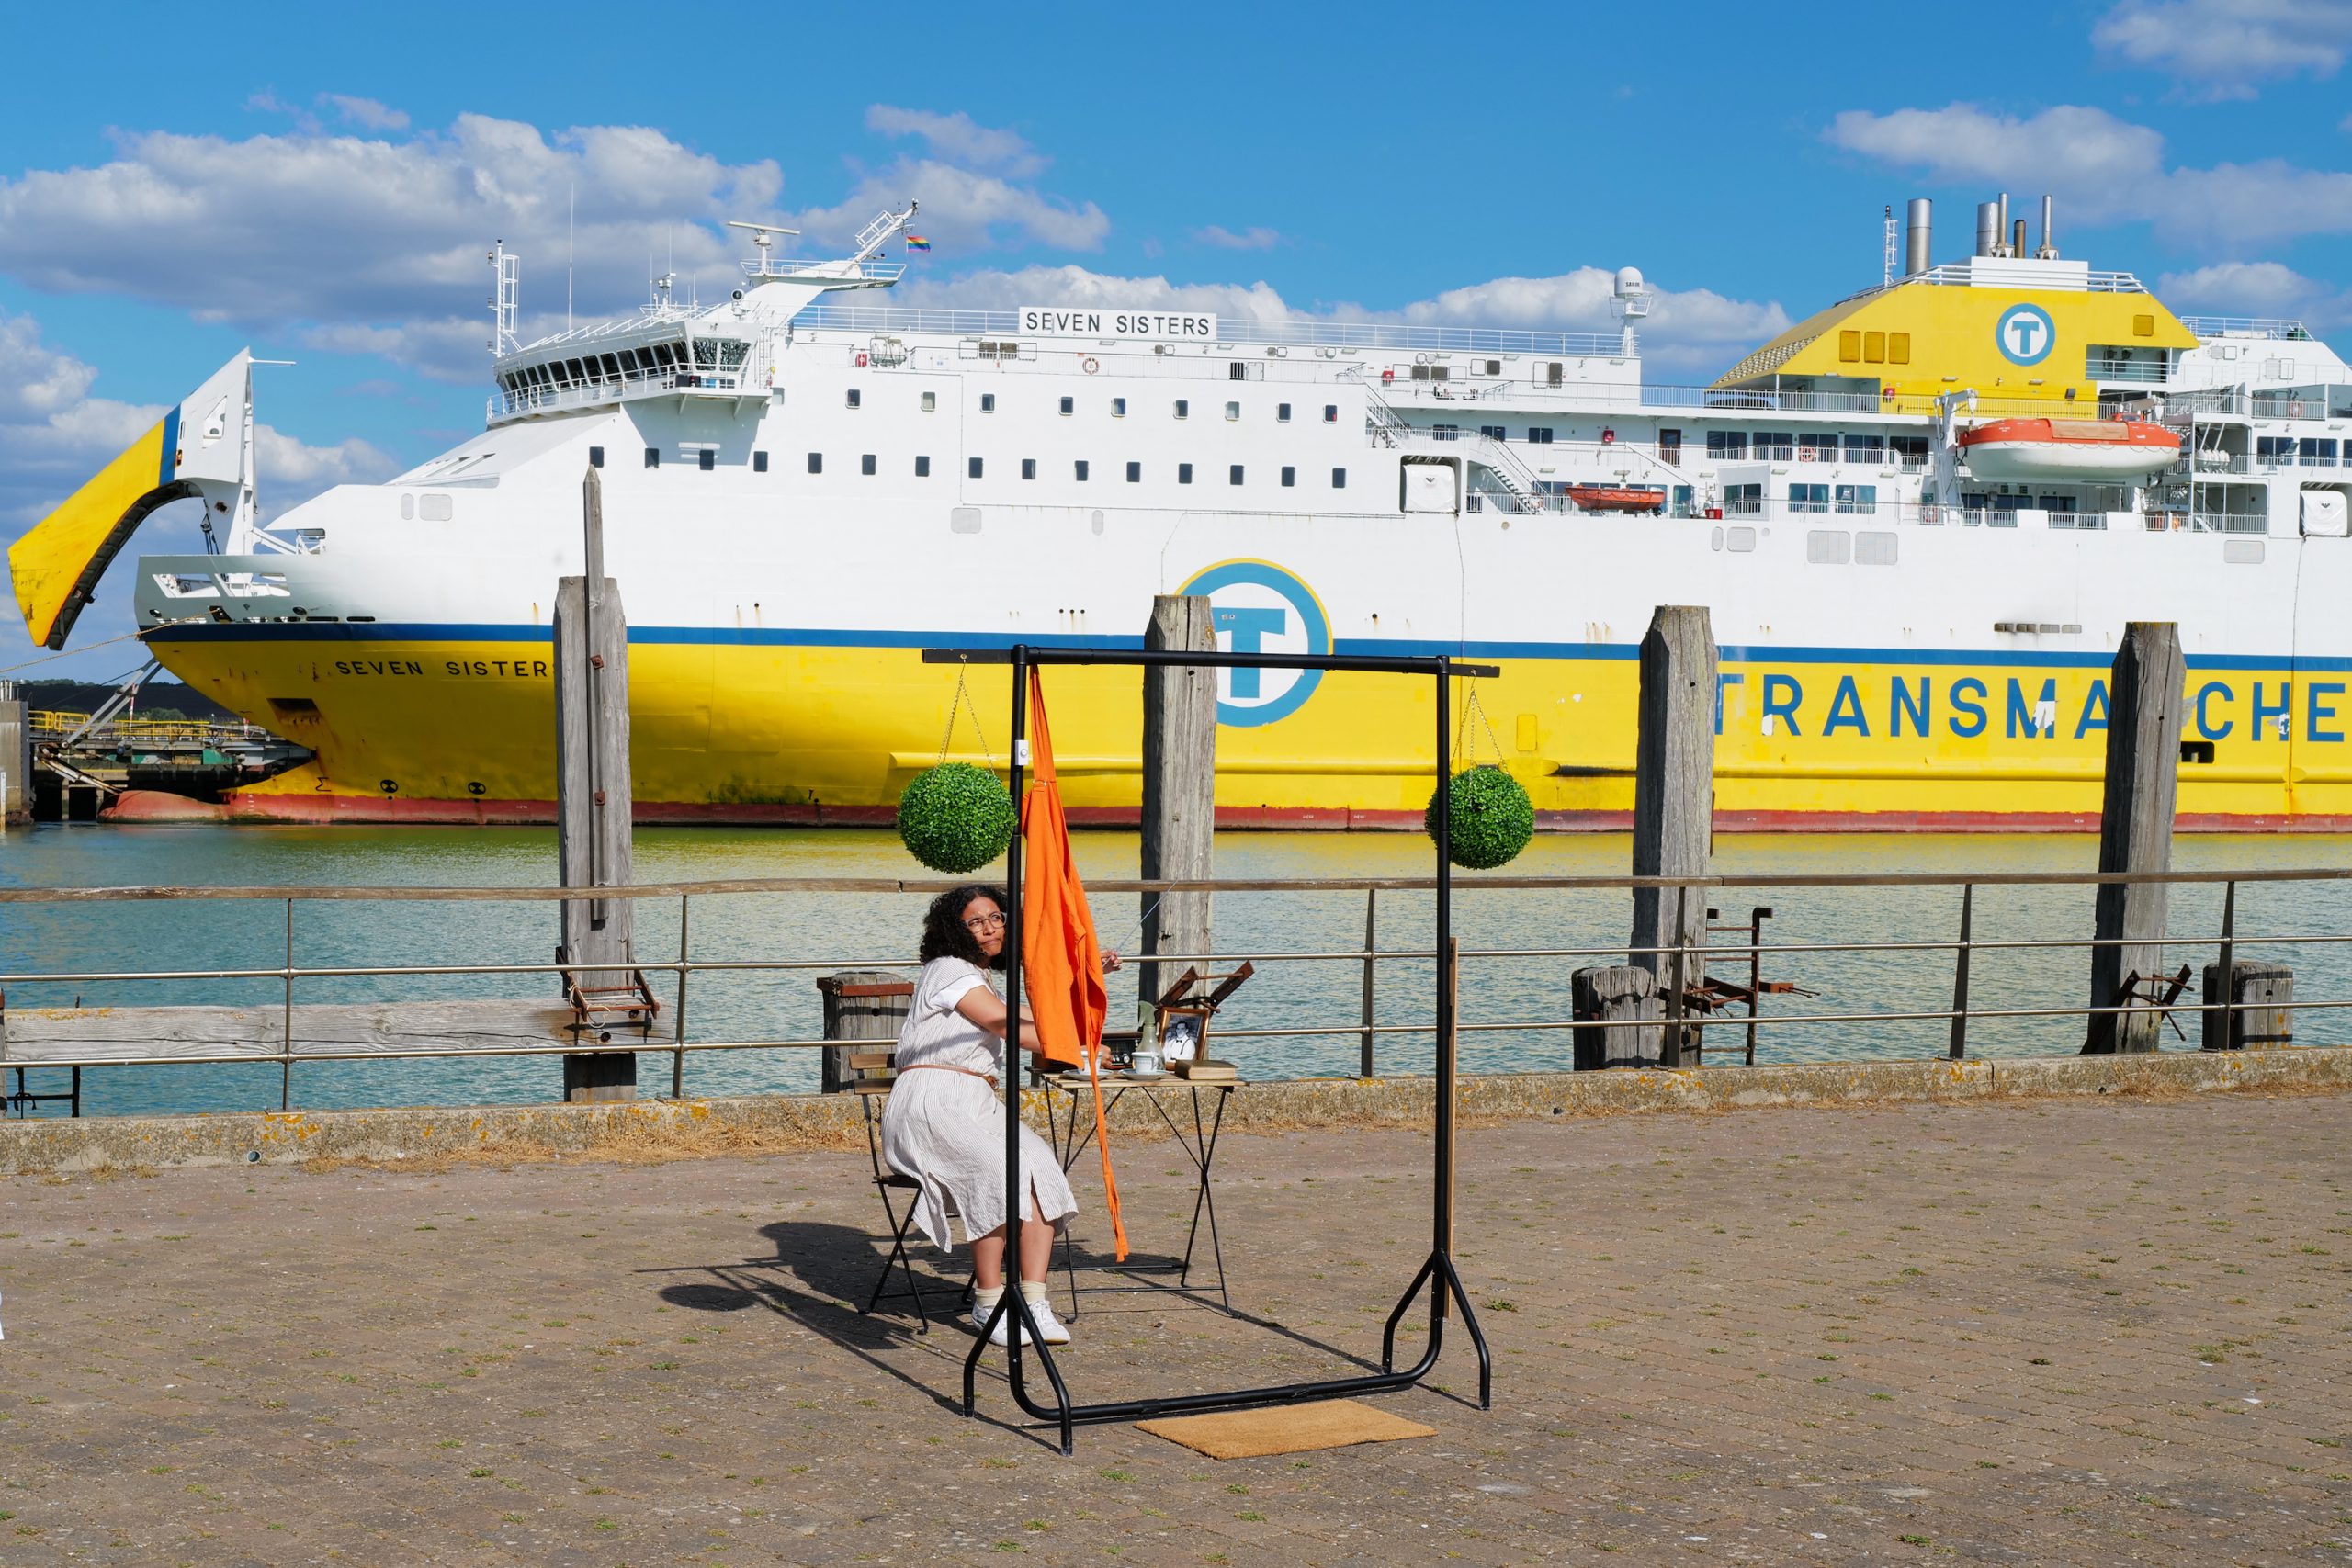 A woman performs in front of a ferry. She is tuning the radio.